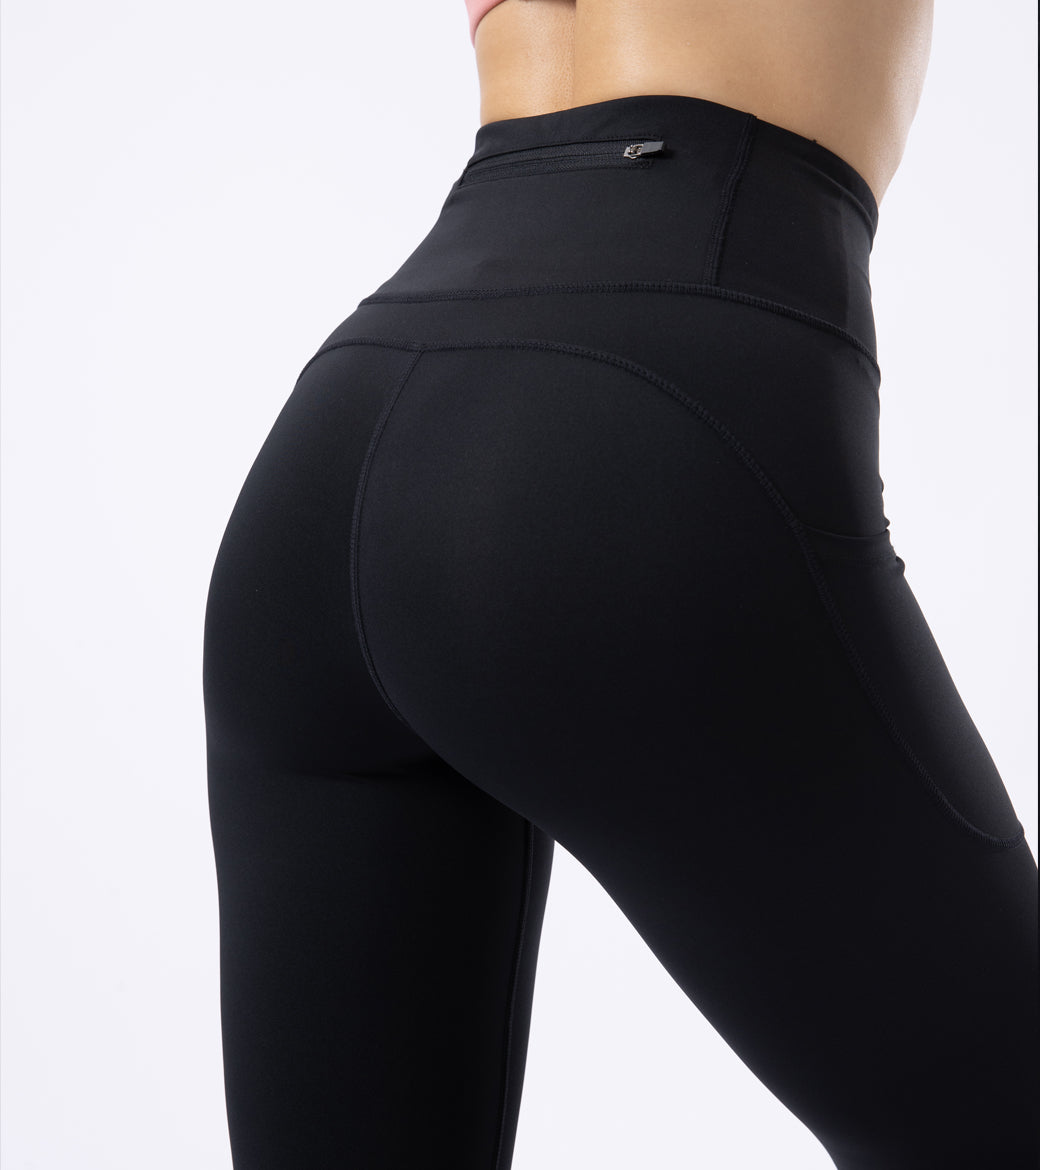 LOVESOFT Womens Black High Waisted Leggings Workout Side Pockets Squat Proof Tummy Control